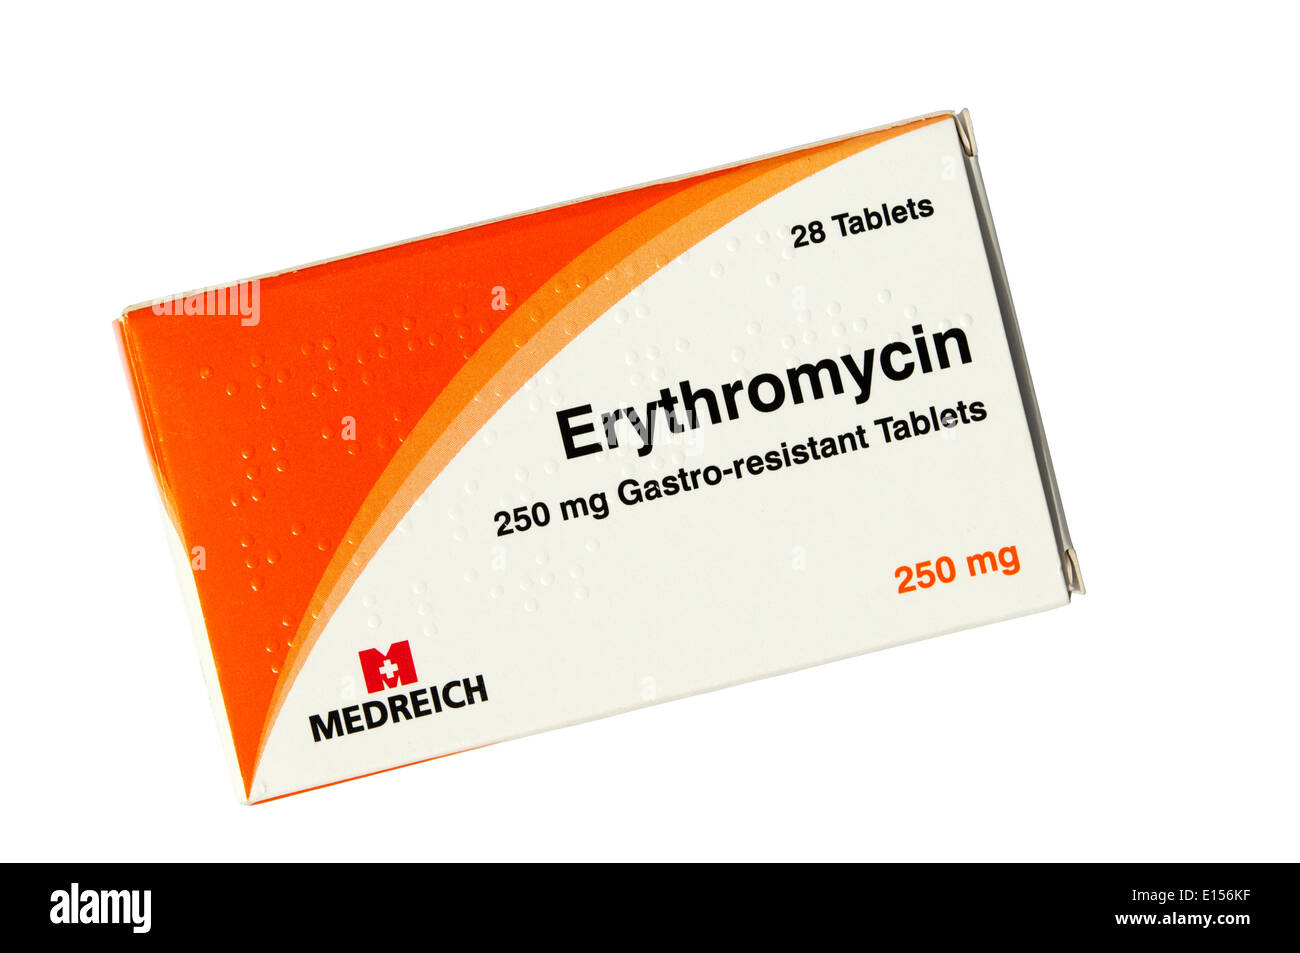 A box of Erythromycin antibiotics made by the pharmaceutical company Medreich. Stock Photo